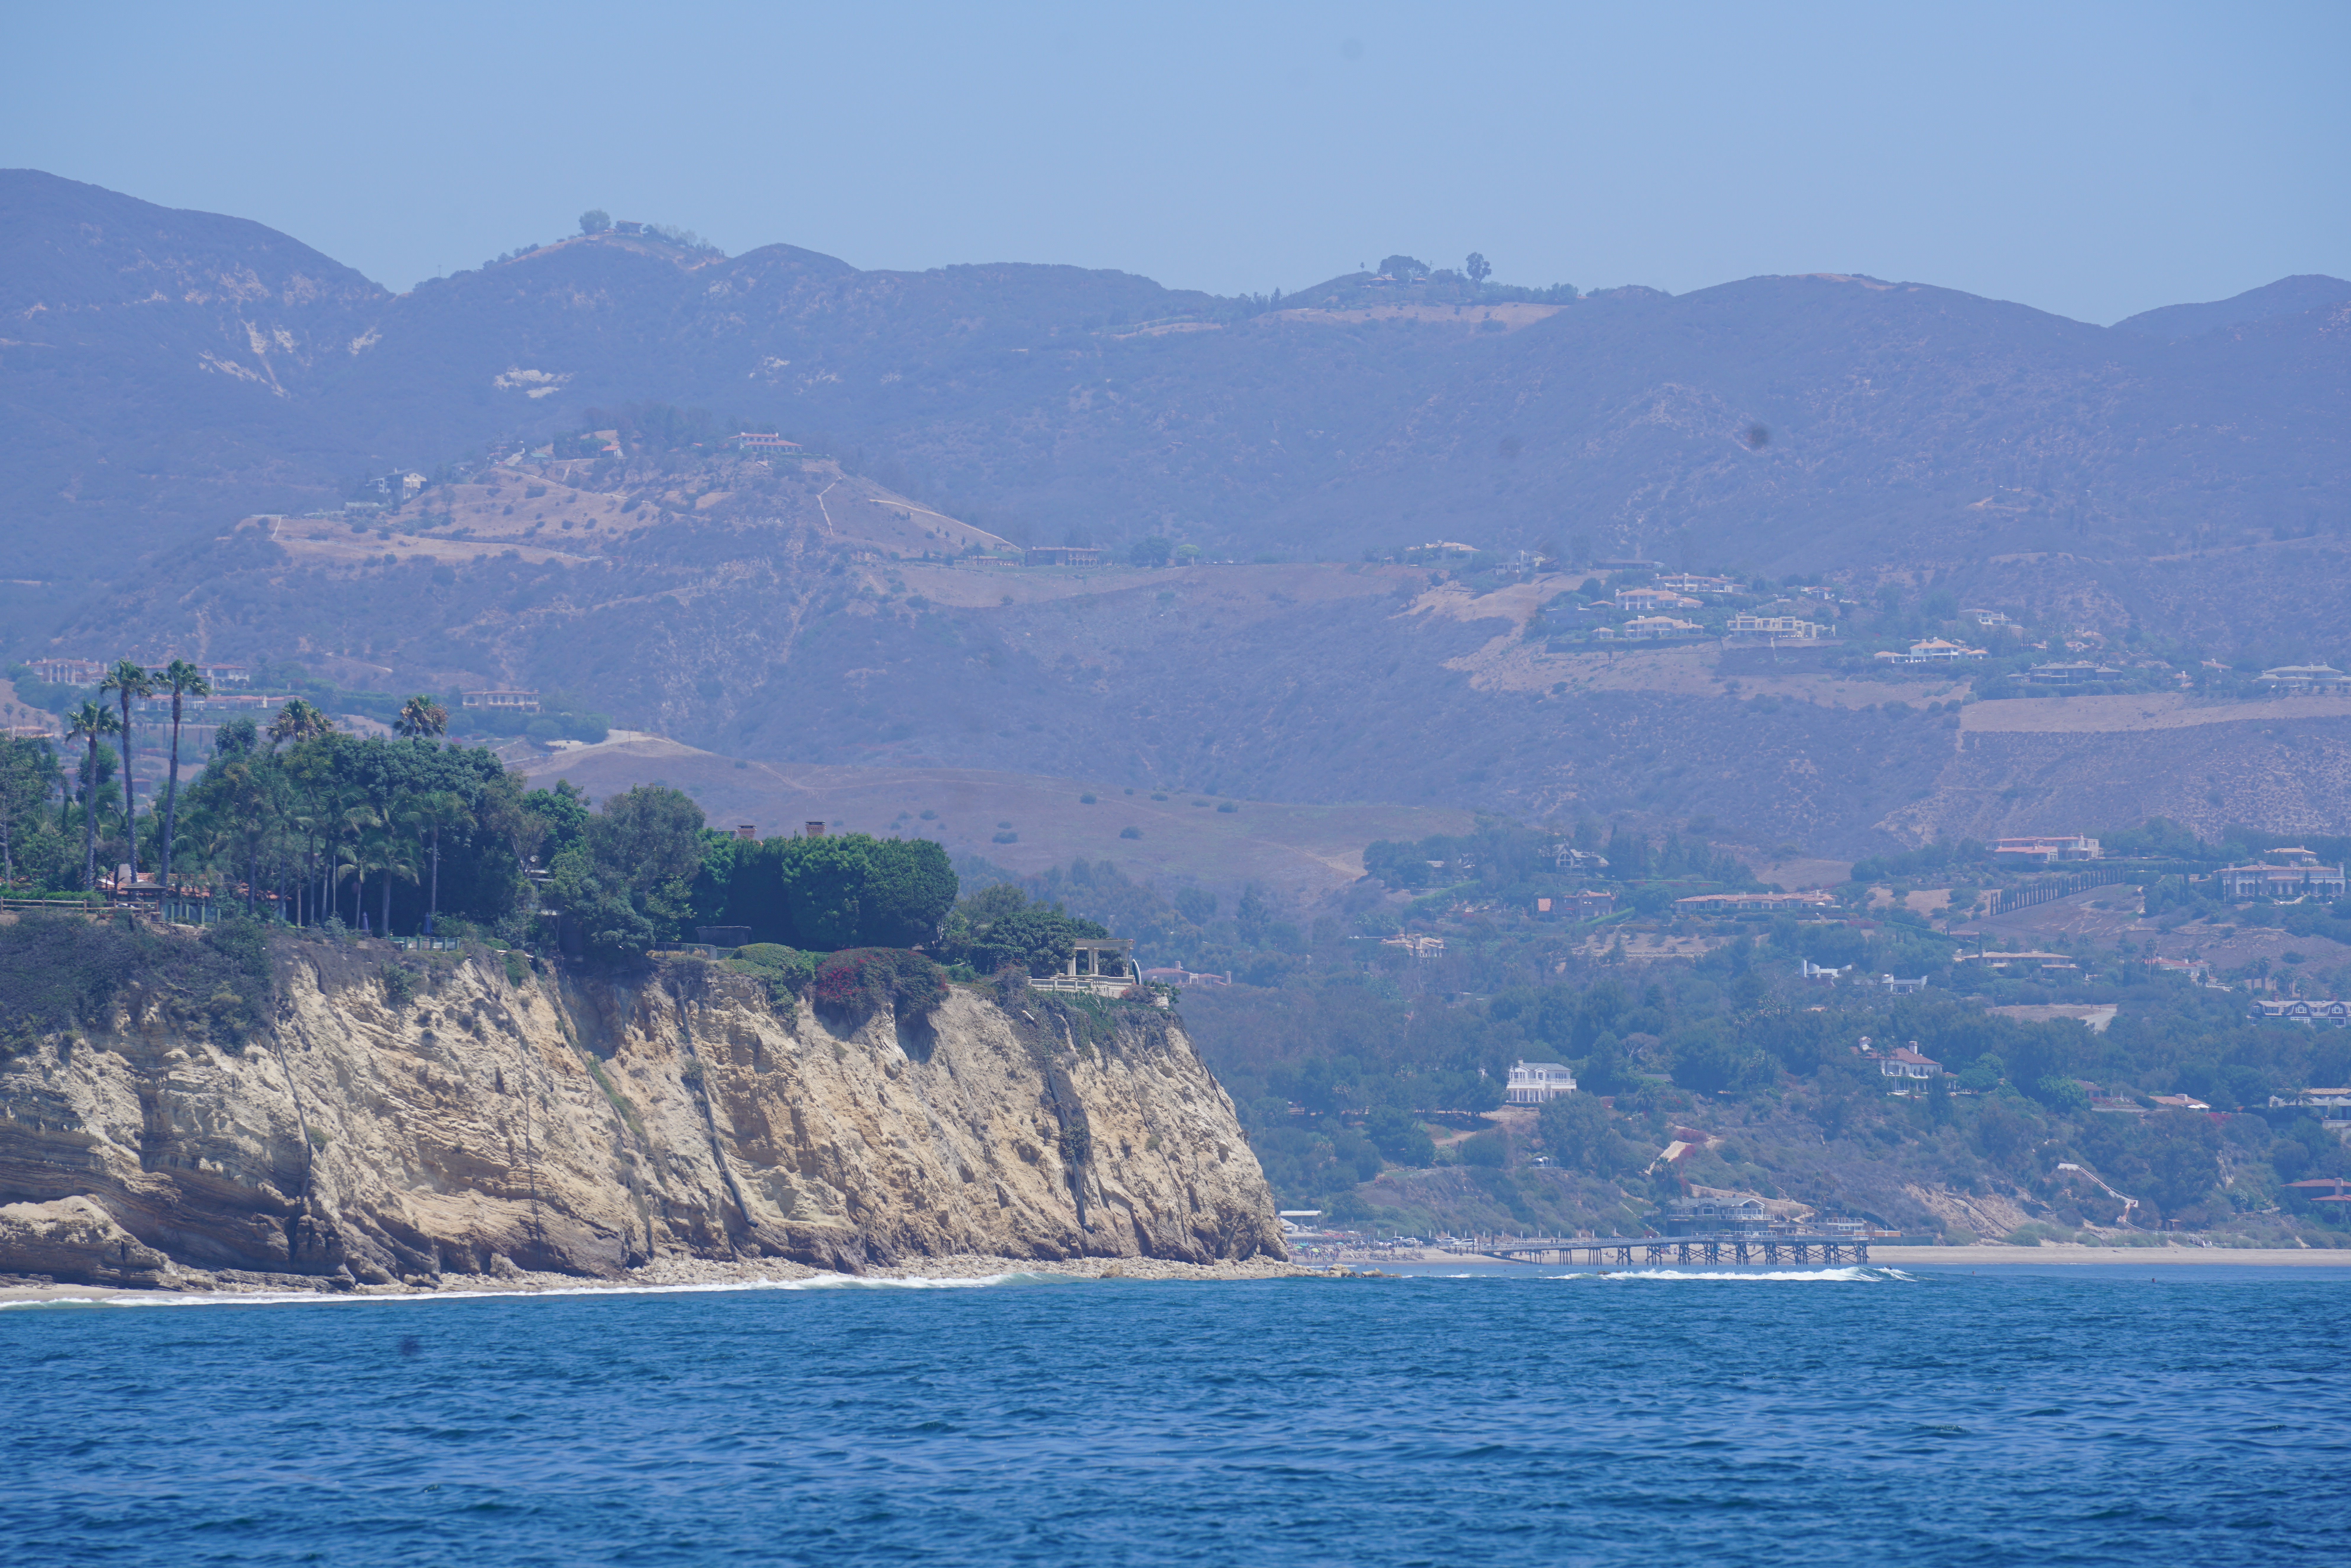 Paradise Cove comes into view as we round Pt. Dume